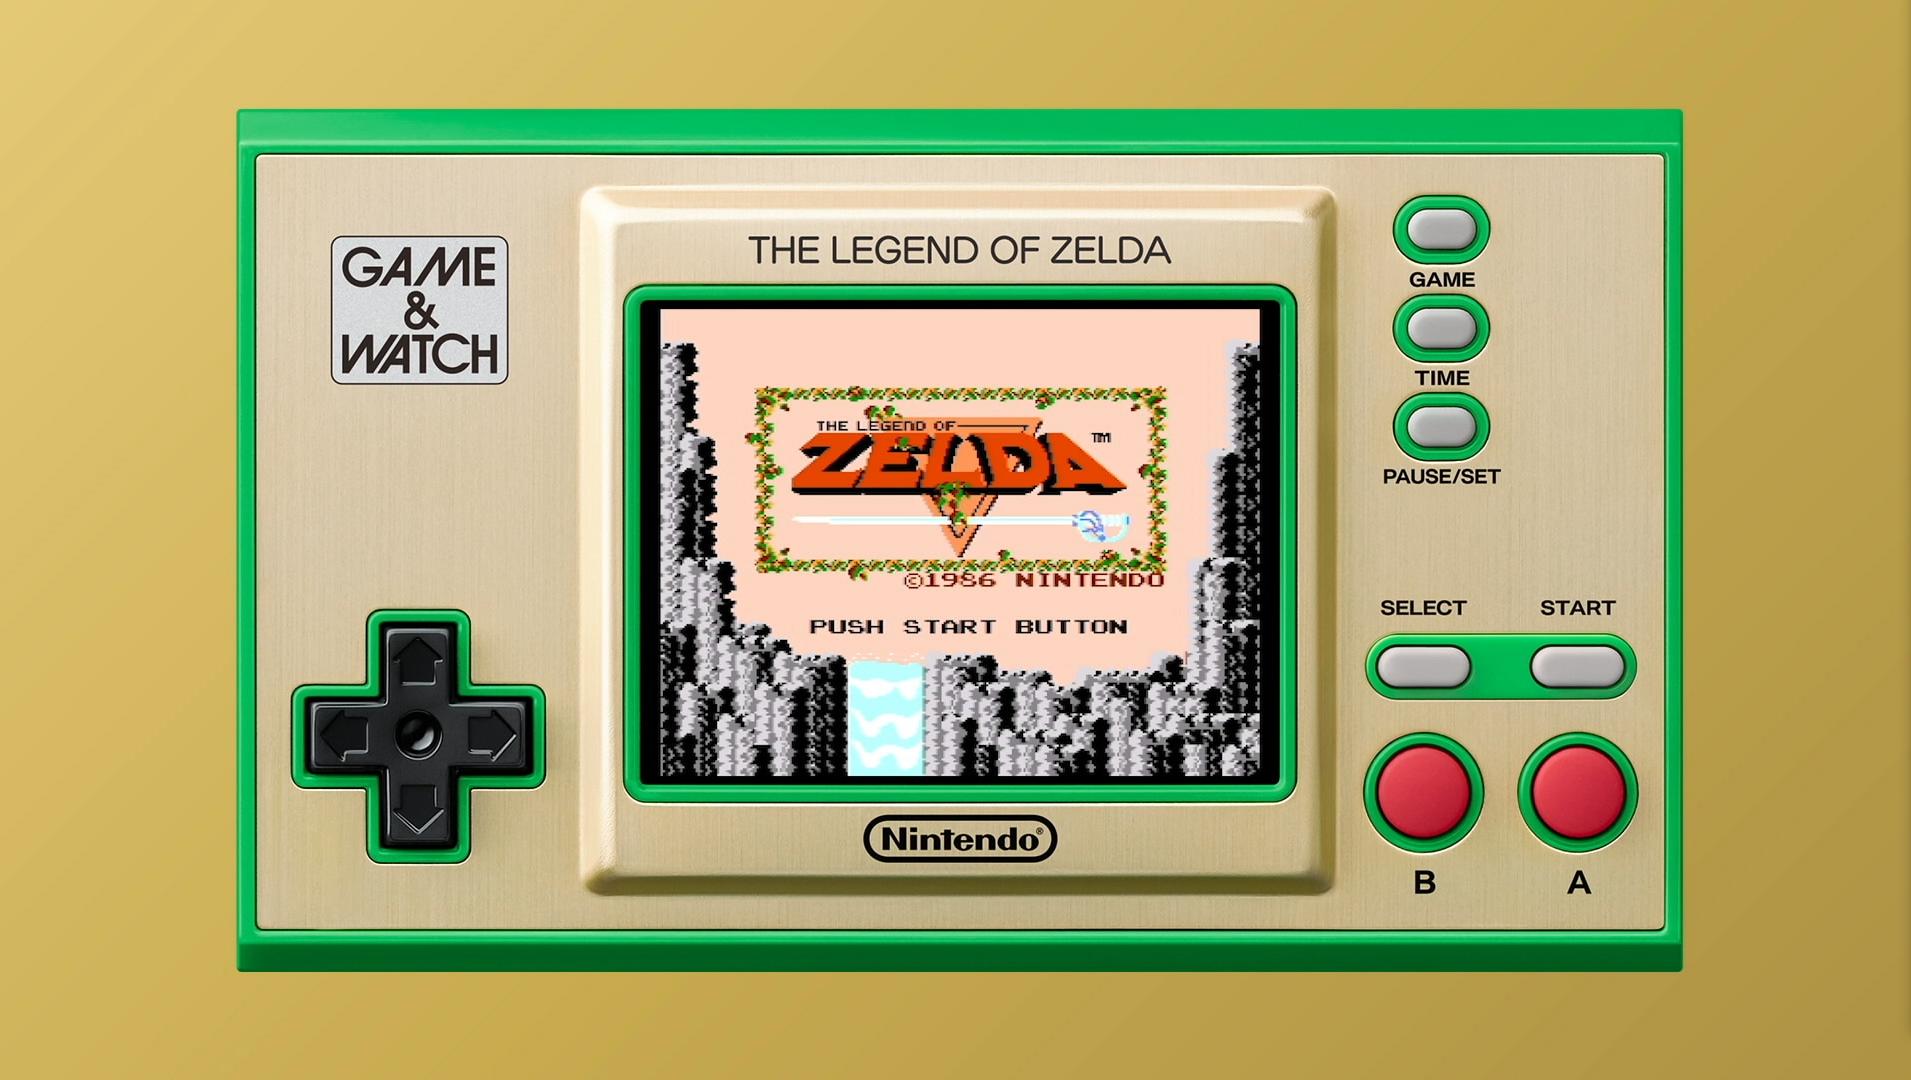 A new Game & Watch system will feature games from The Legend of Zelda